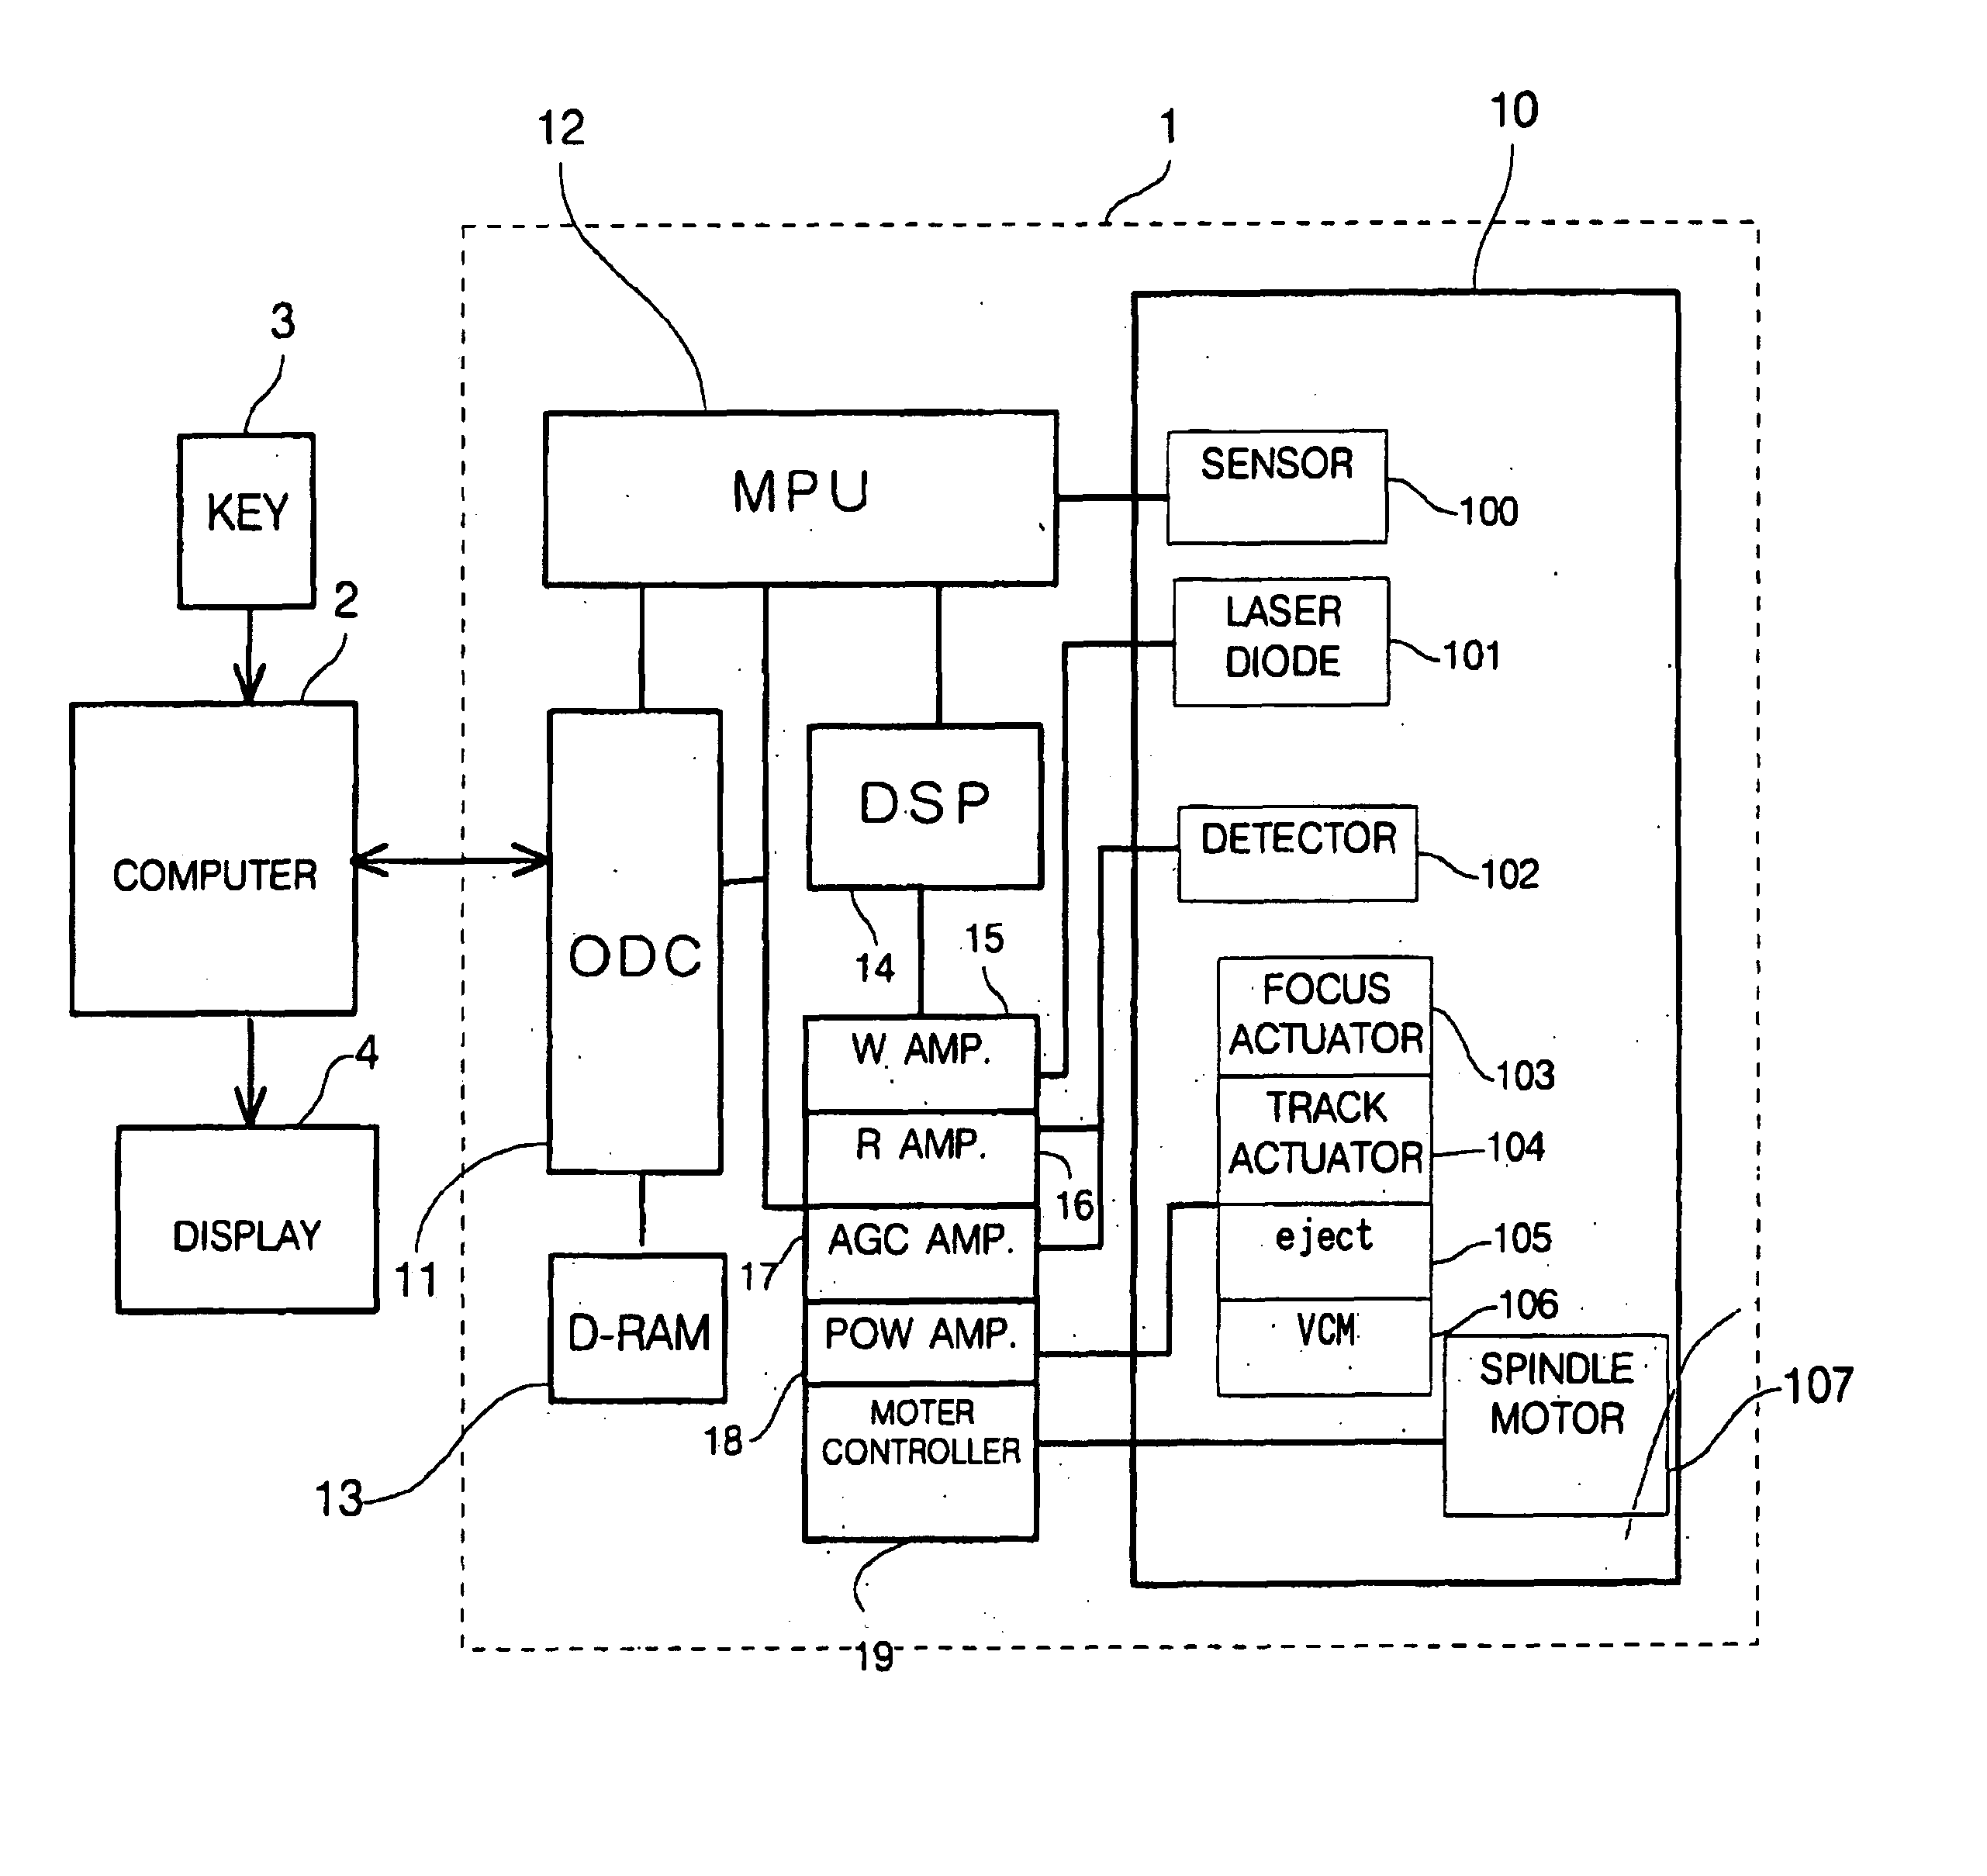 Data protection method for a removable storage medium and a storage device using the same